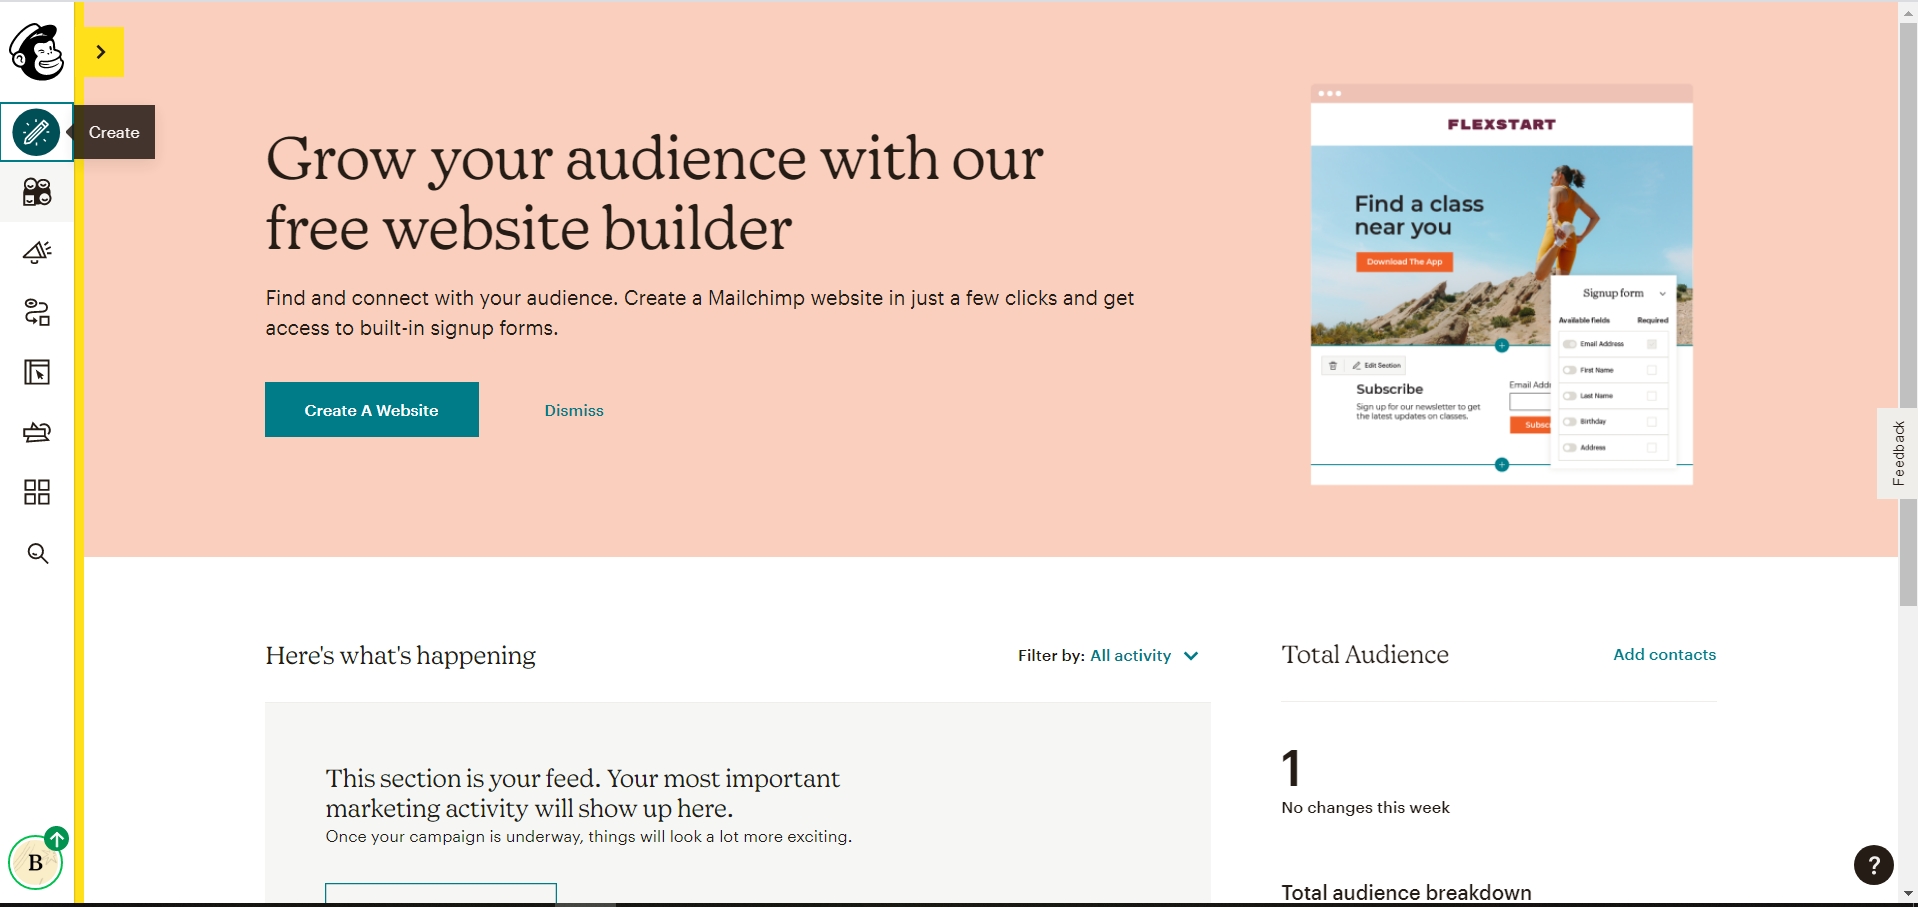 Mailchimp offers multiple marketing features for small businesses